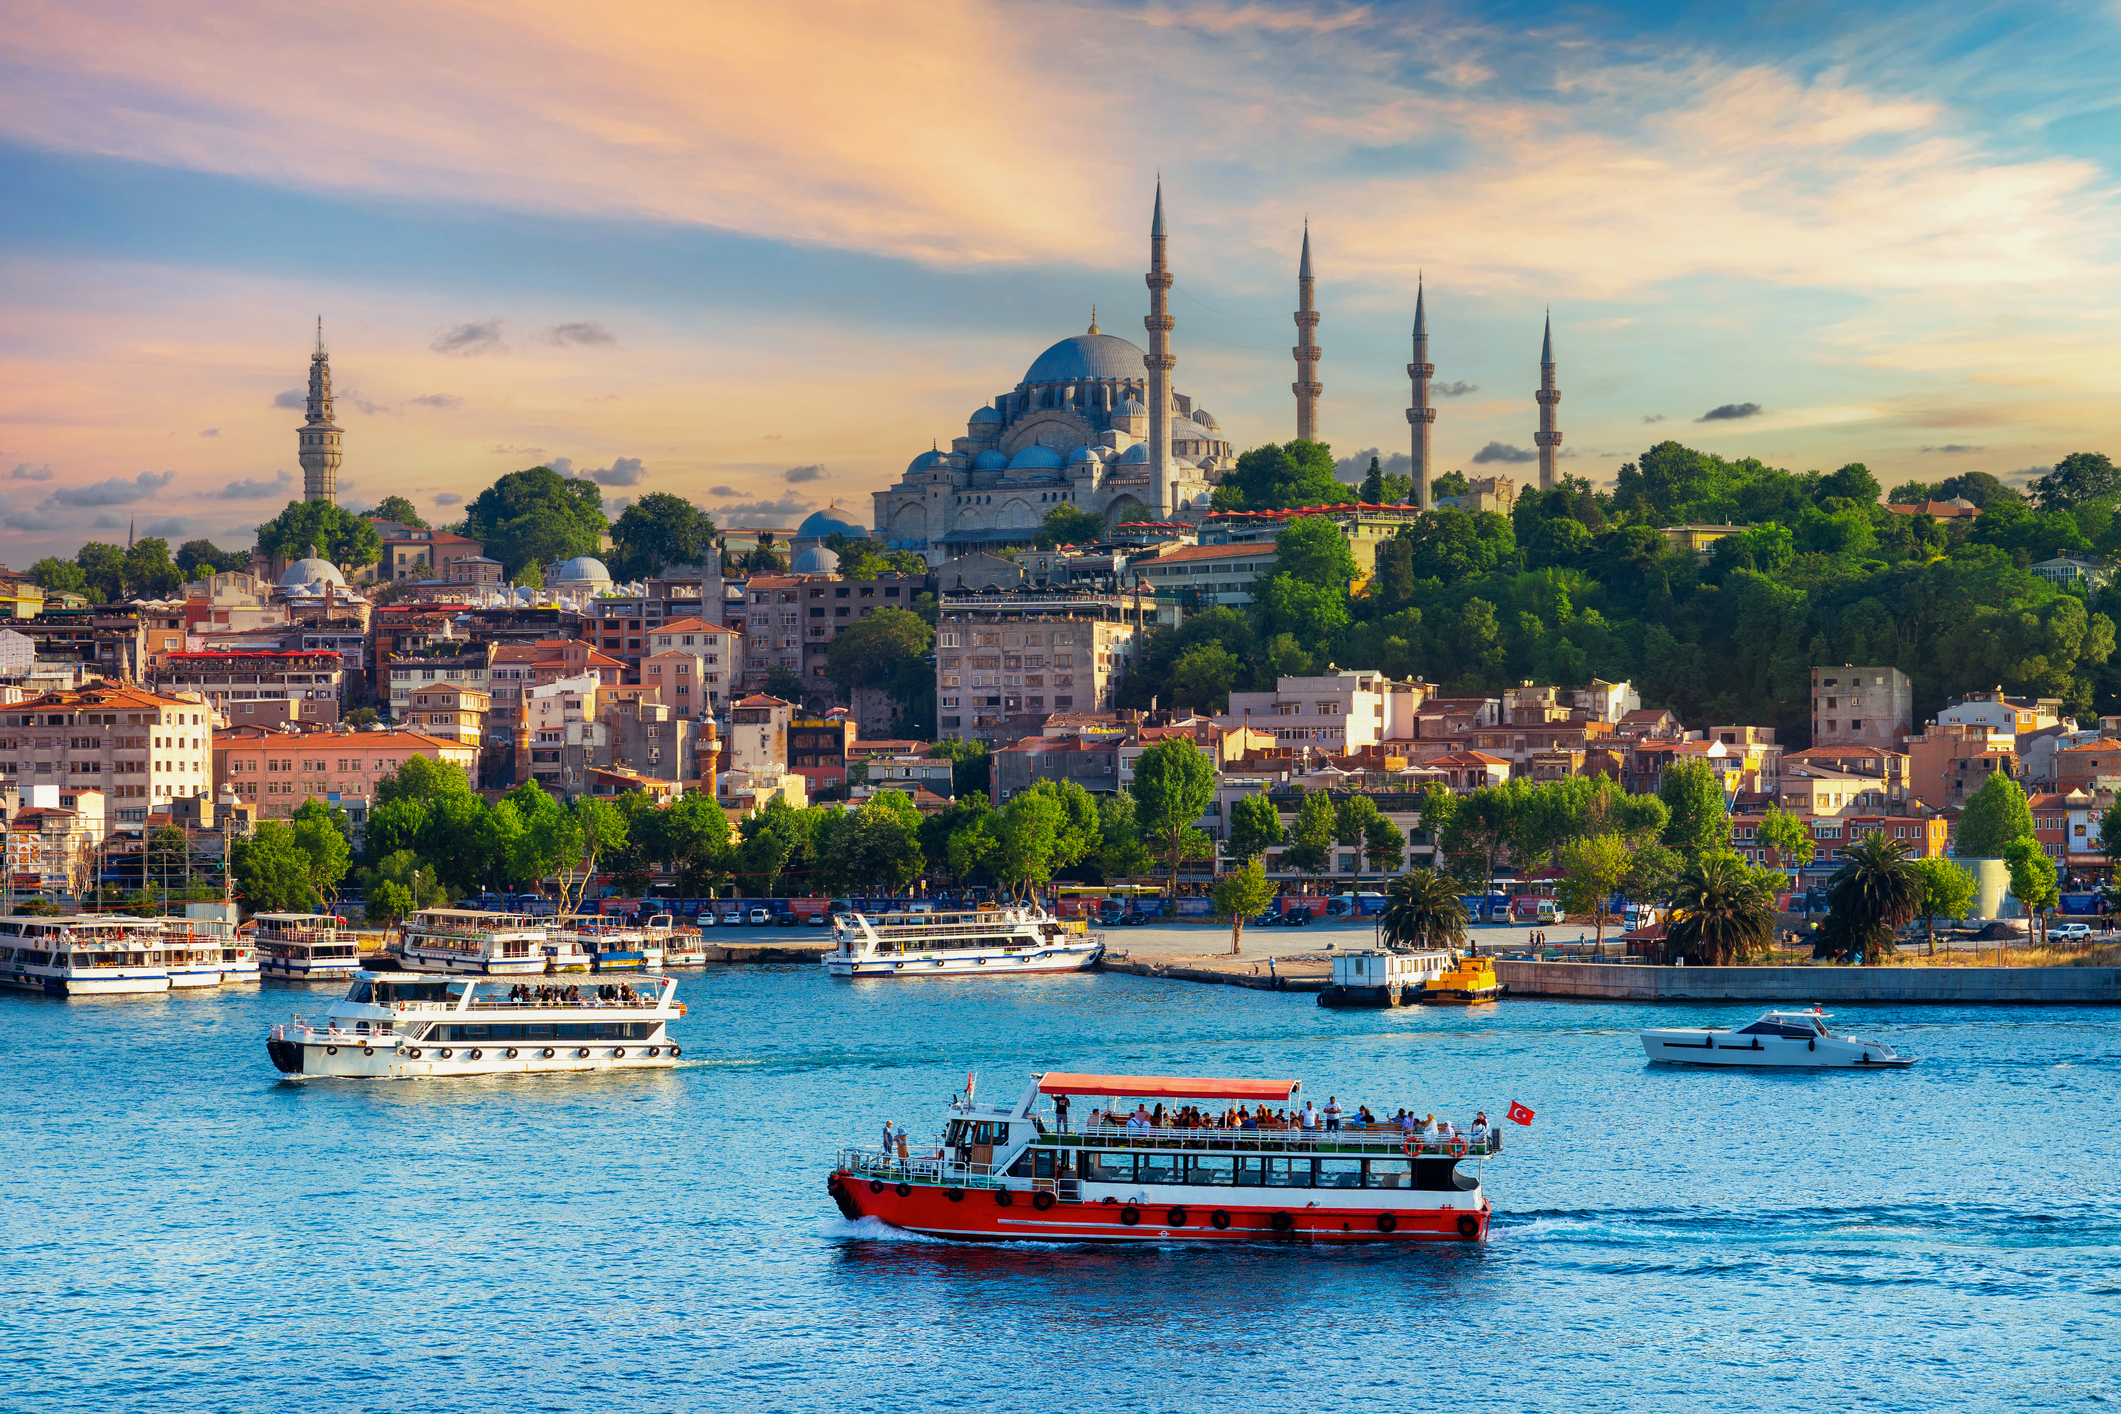 Skyline of Istanbul with iconic Suleymaniye Mosque and bustling waterway with boats